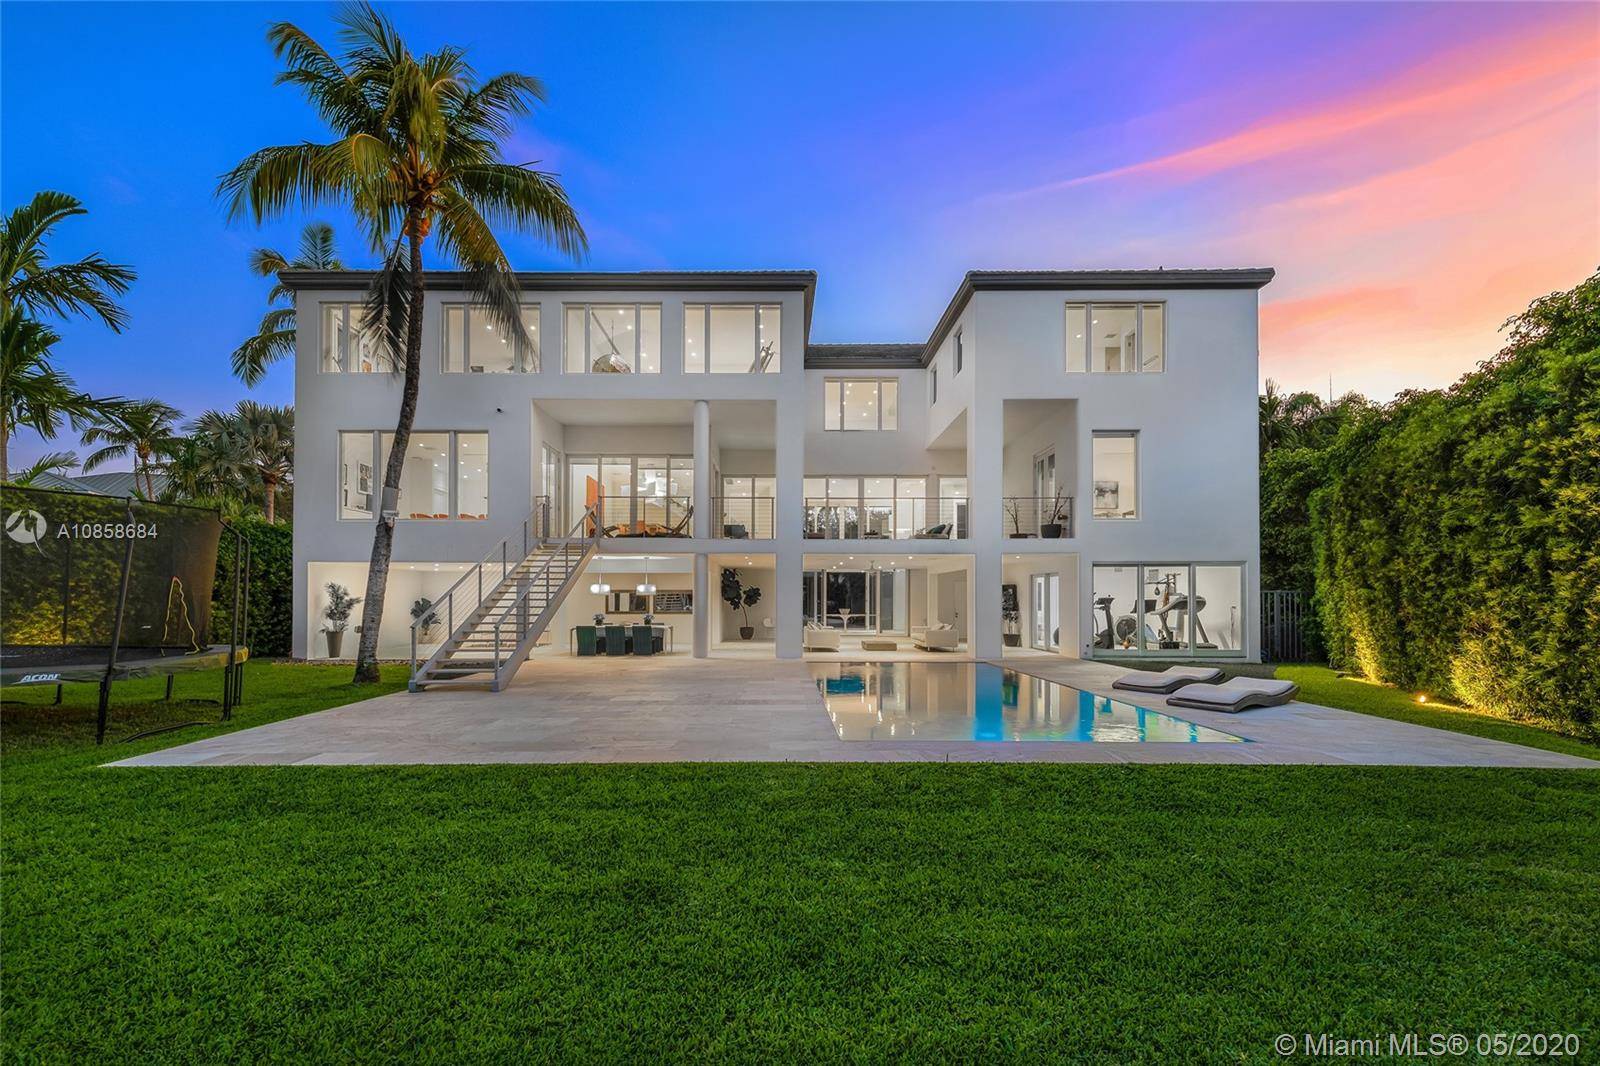 This modern waterfront home is located in the exclusive Mashta Island, on a quiet cul de sac ideal for a family in Key Biscayne.